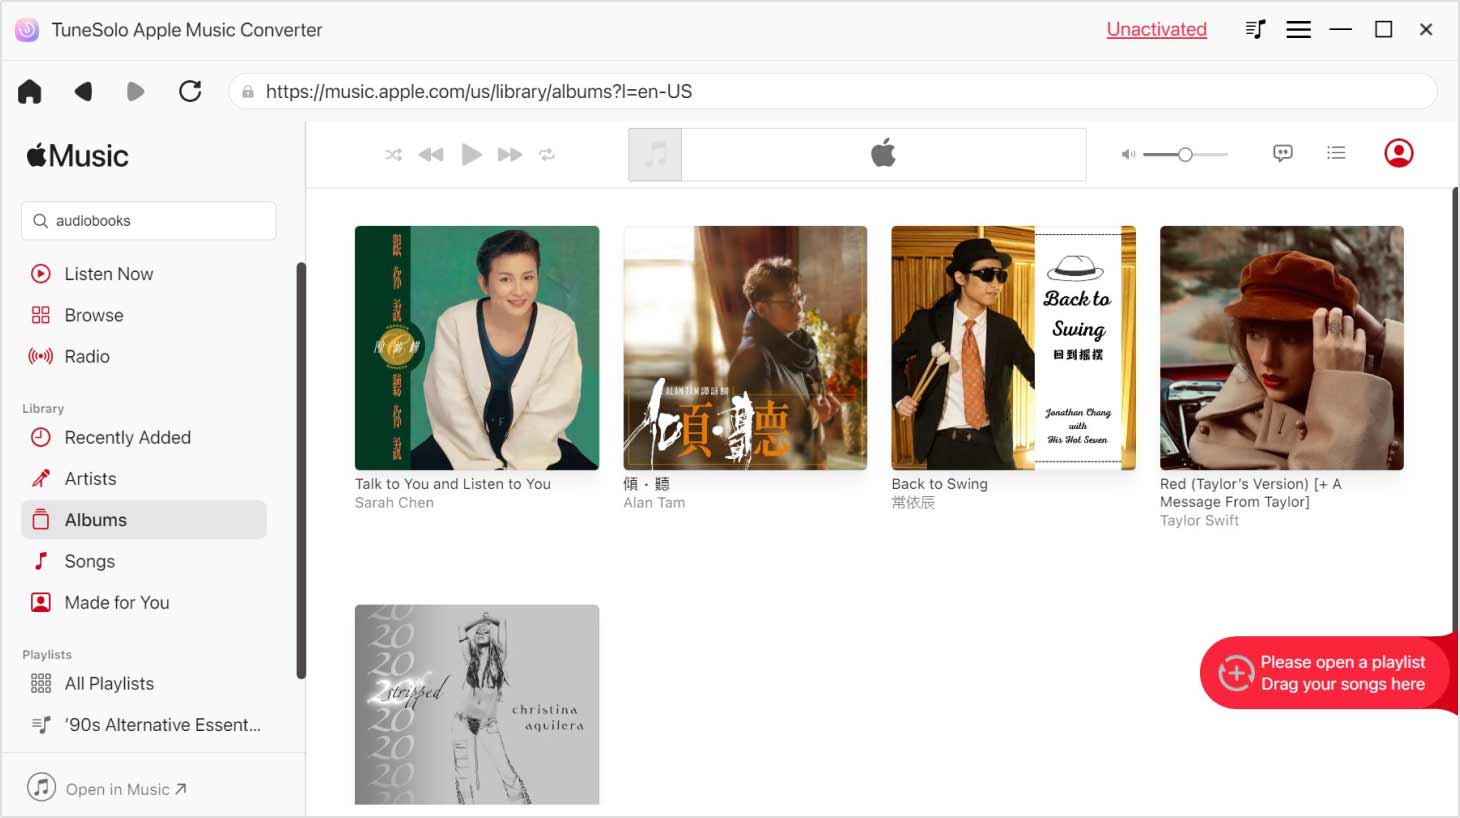 Download Apple Music to MP3